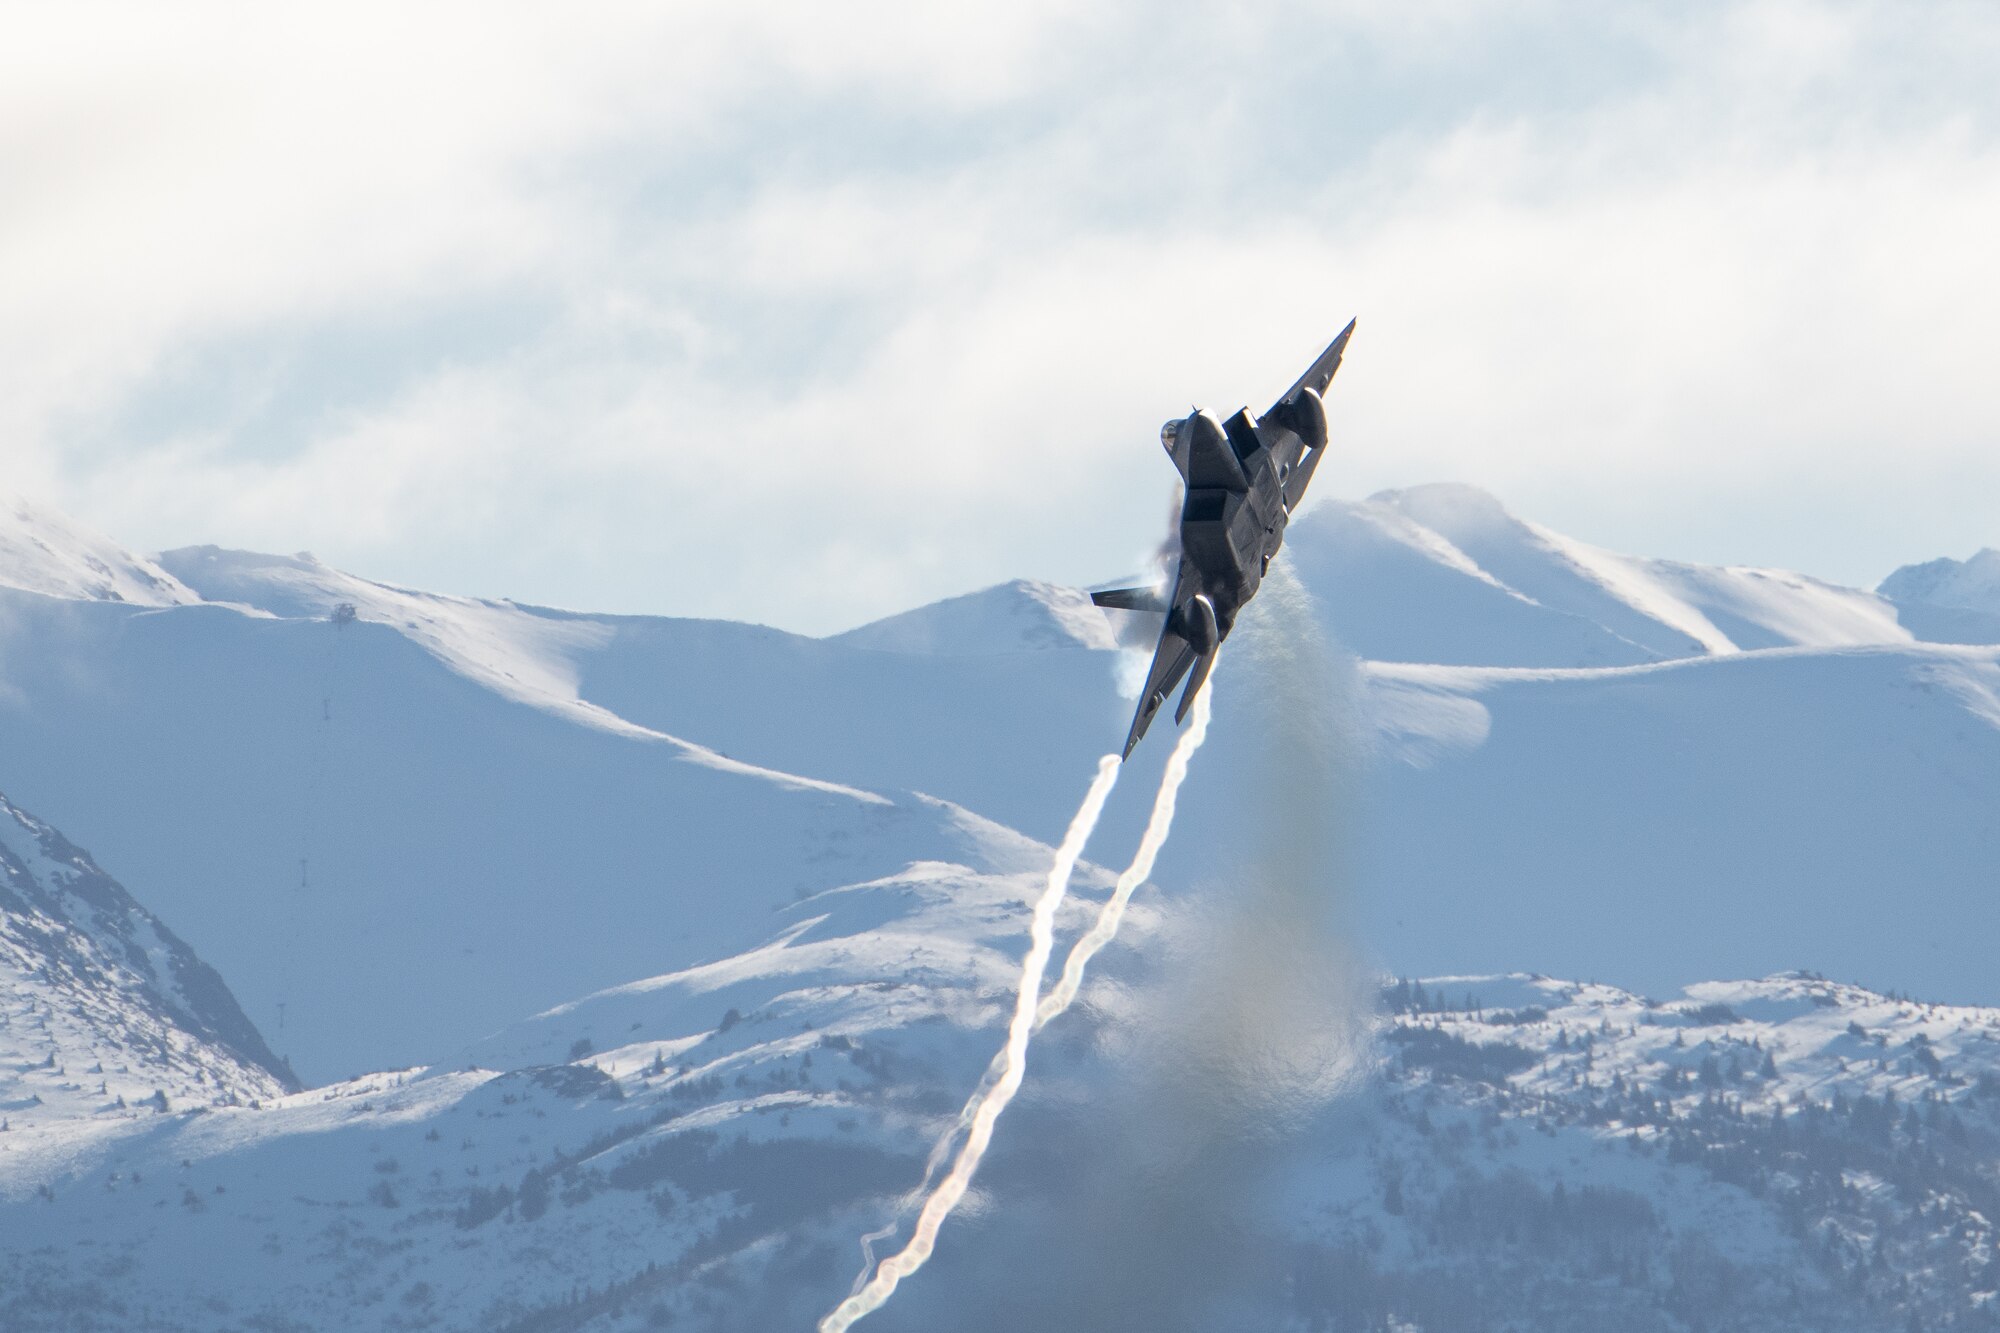 A photo of an F-22 Raptor flying